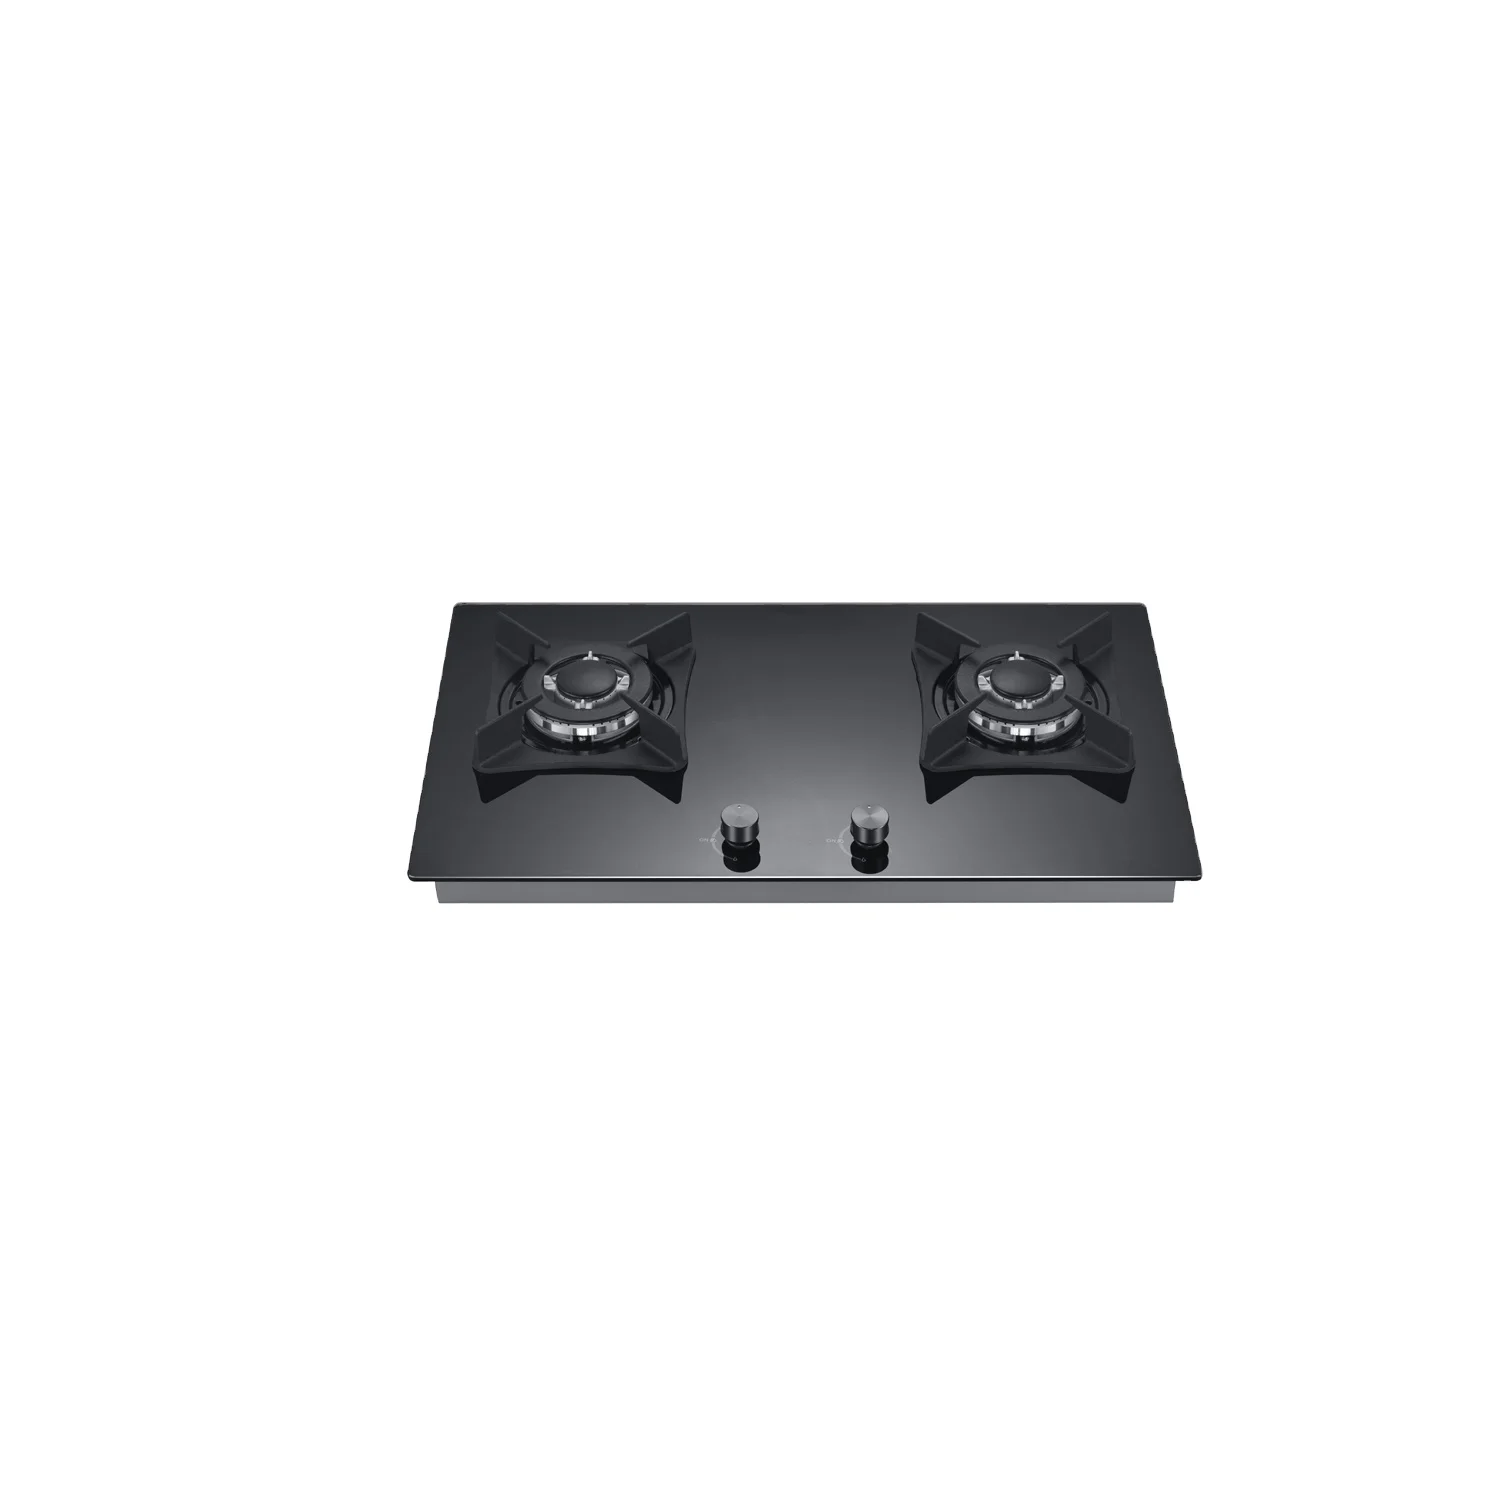 Best Sale Cheap Price Best Quality 2 Burner Table Top Electric Gas Stove From China Buy Table Top Electric Stove